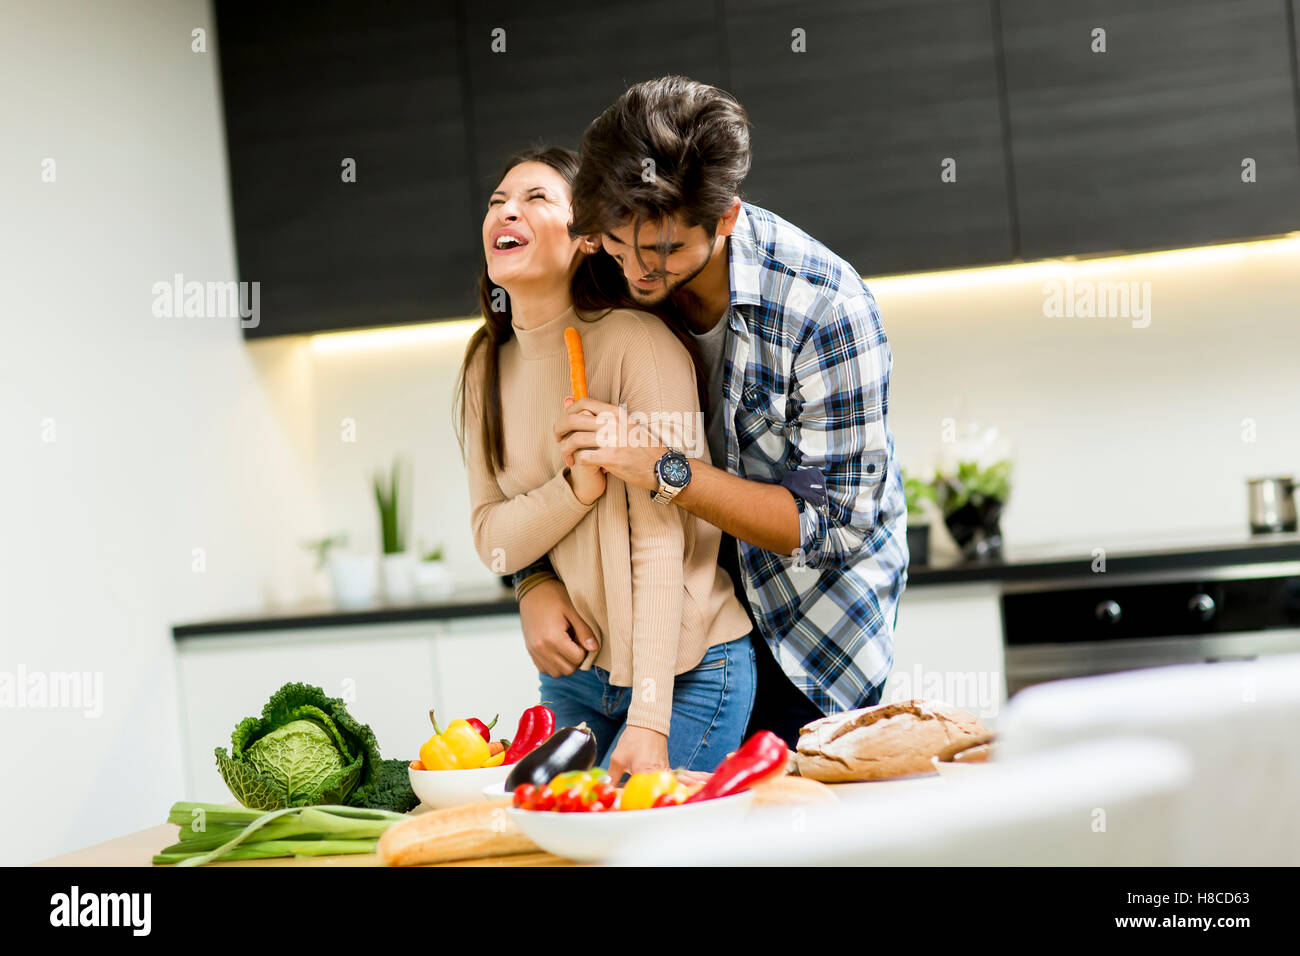 Young couple having fun while preparing food in the kitchen Stock Photo